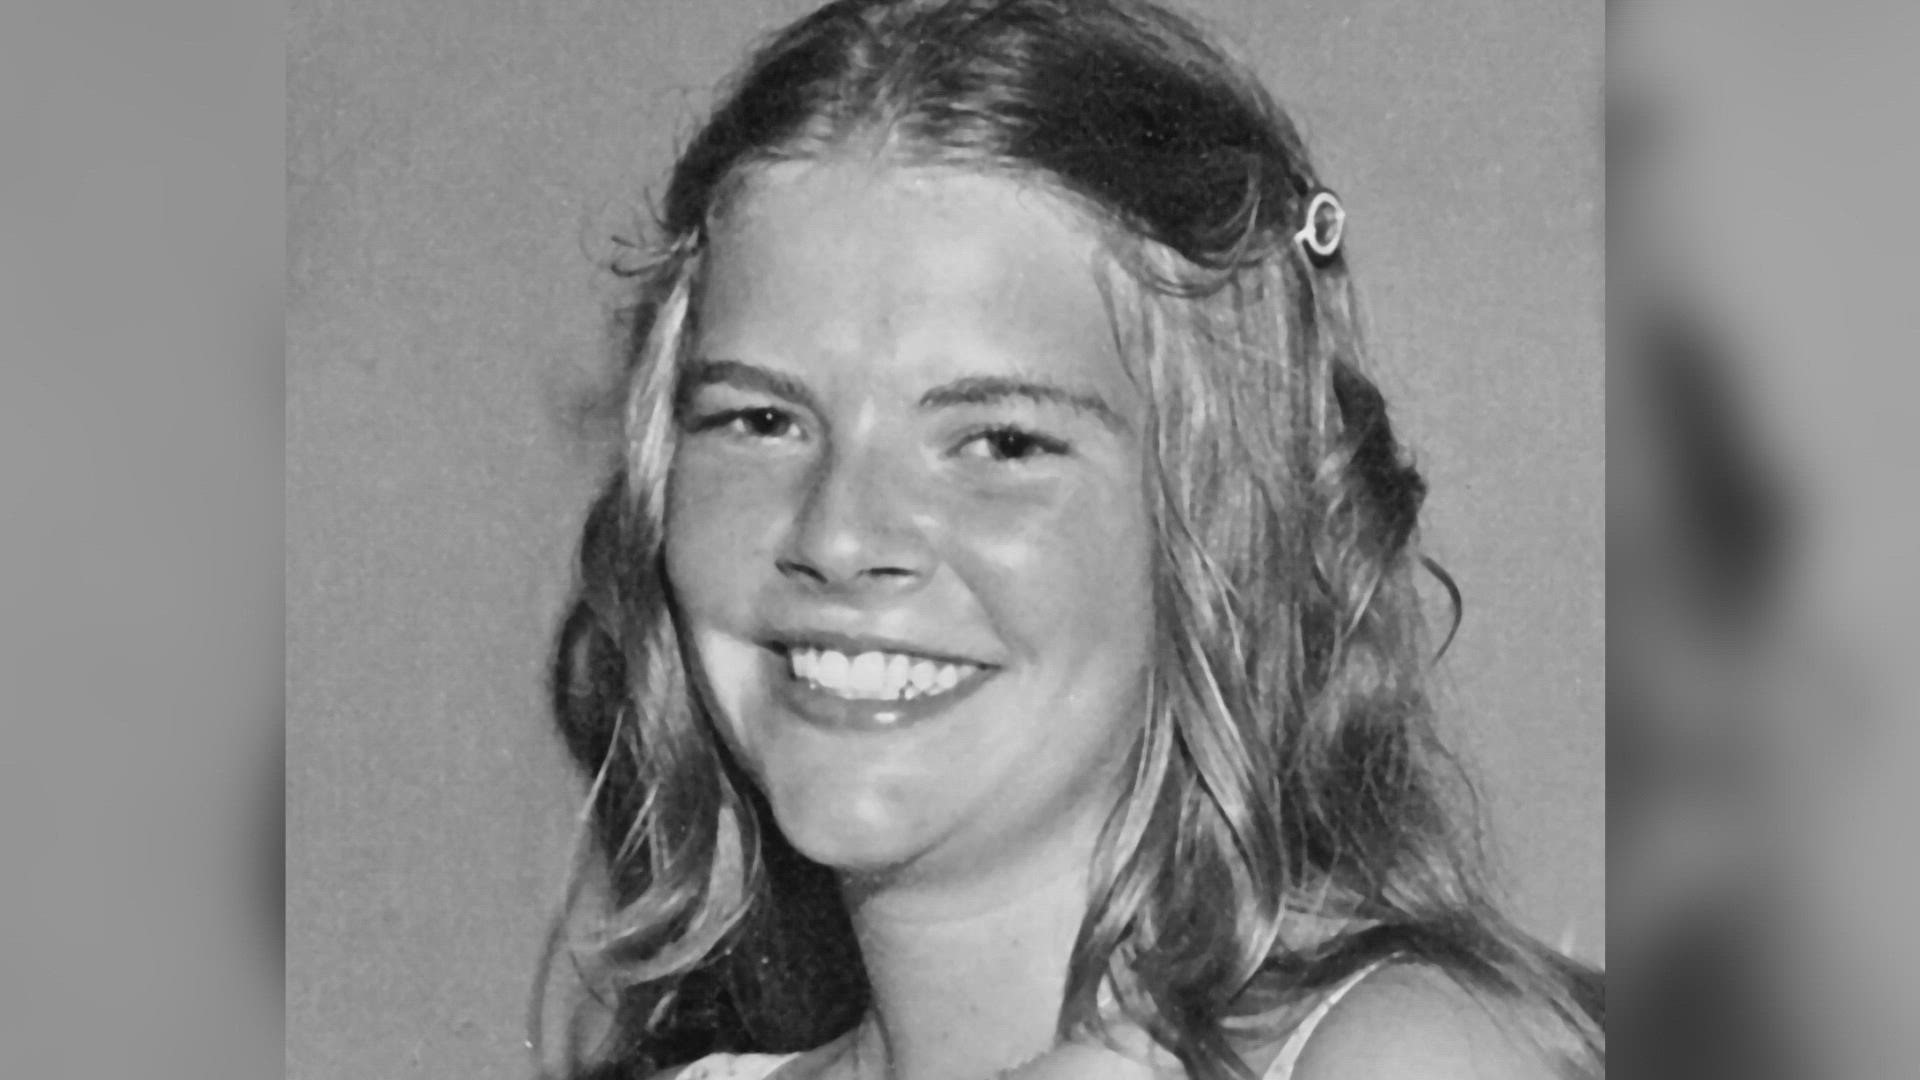 Mary Tanner was 18 when she was murdered in 1978. Journalist Rik O'neal has spent the last eight years working on a documentary about her unsolved murder.